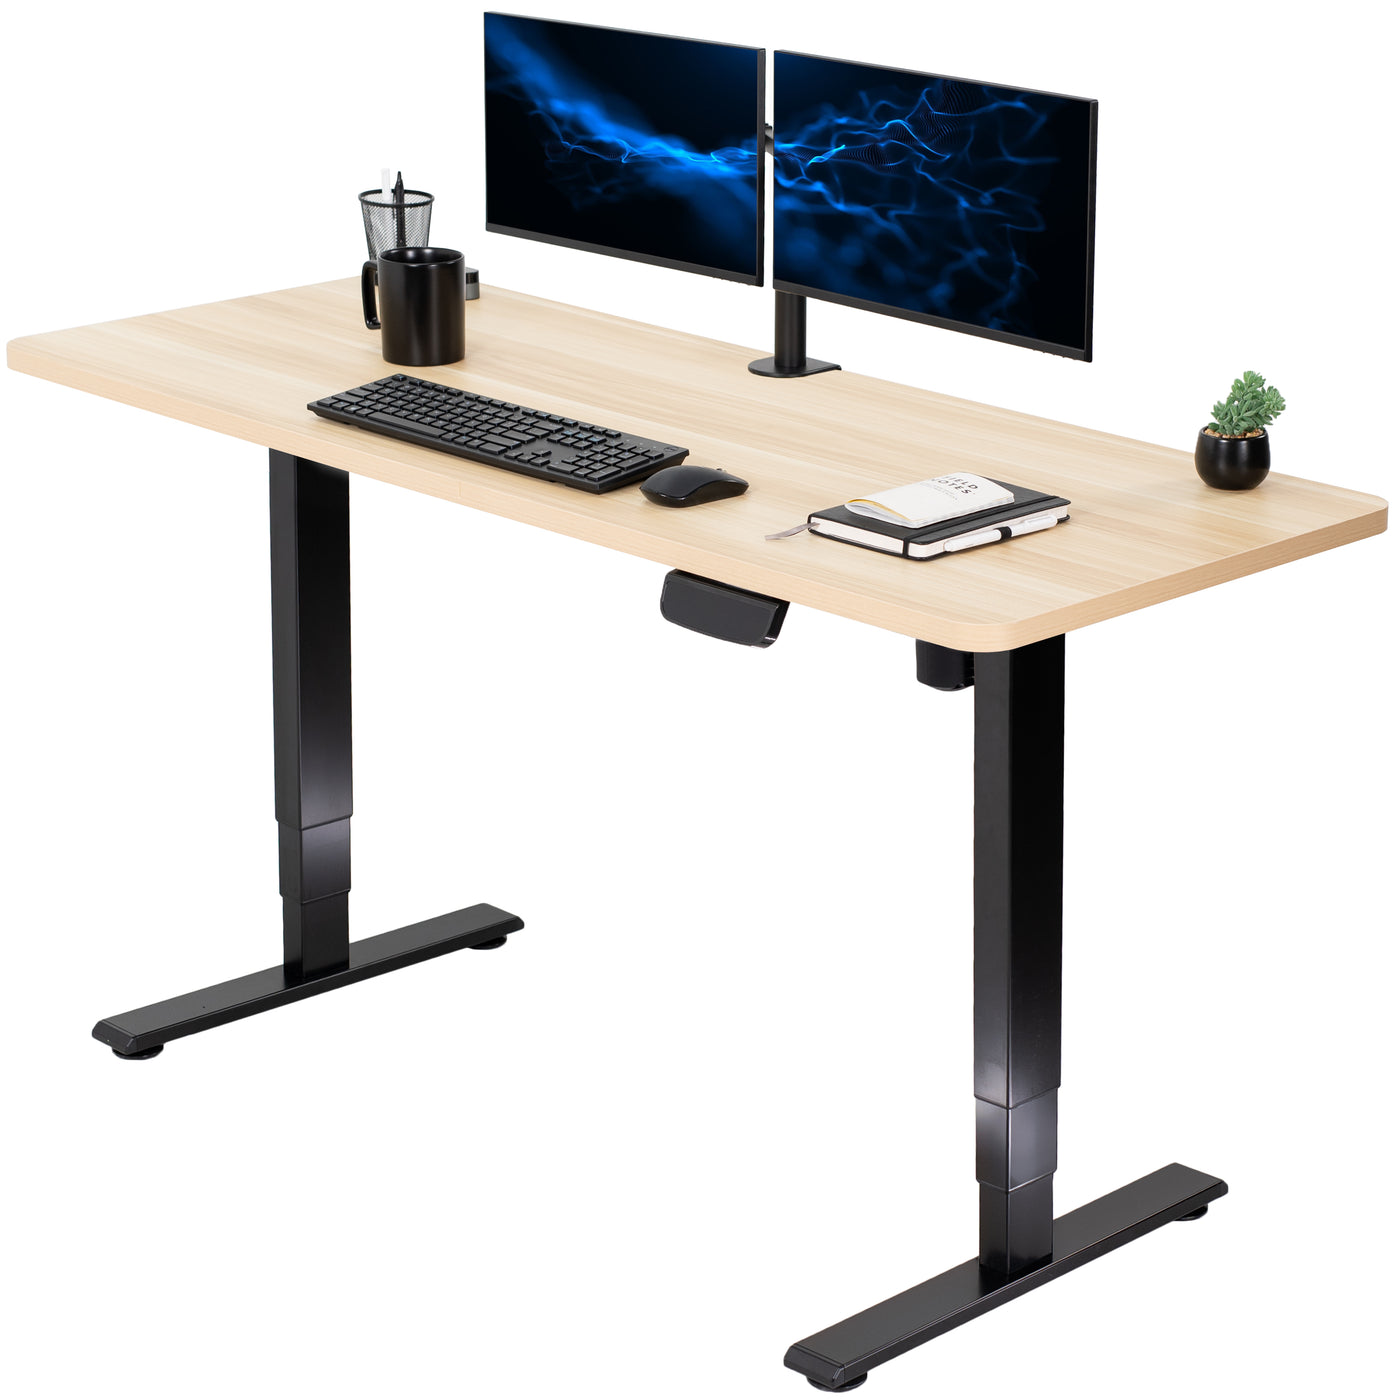 Electric 60” x 24” Stand Up Desk Workstation